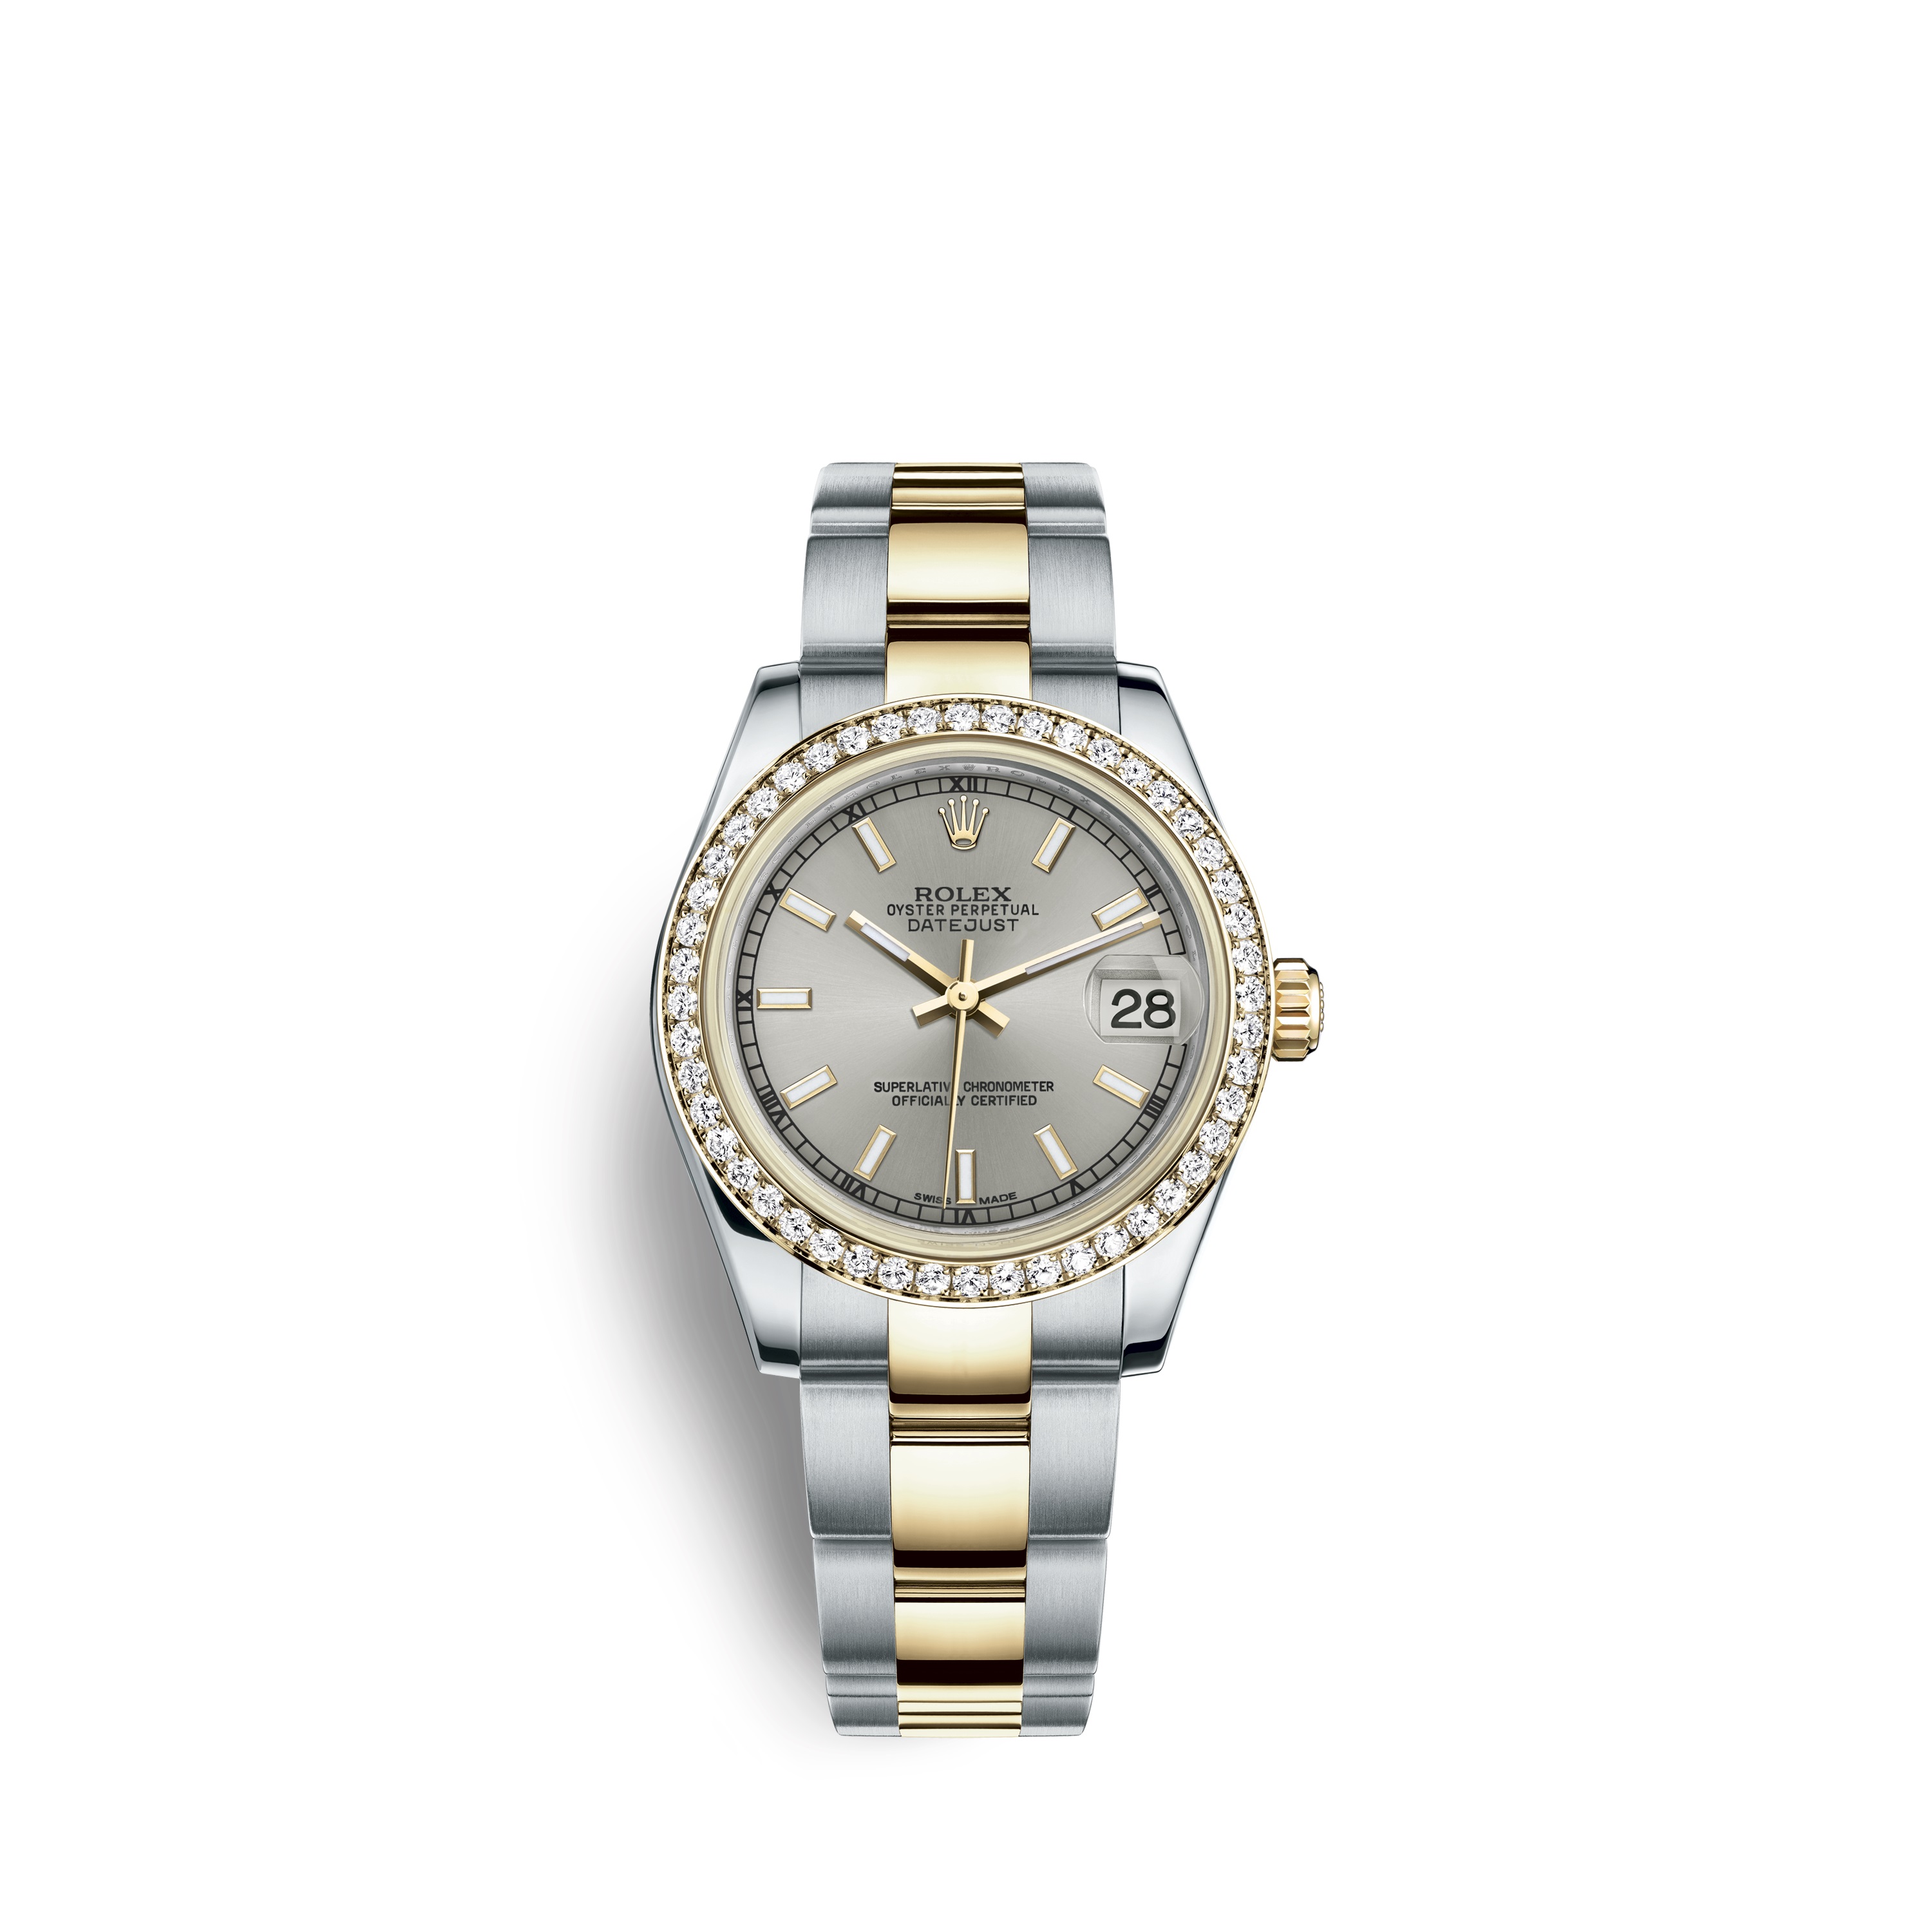 Datejust 31 178383 Gold and Stainless Steel Watch (Silver)